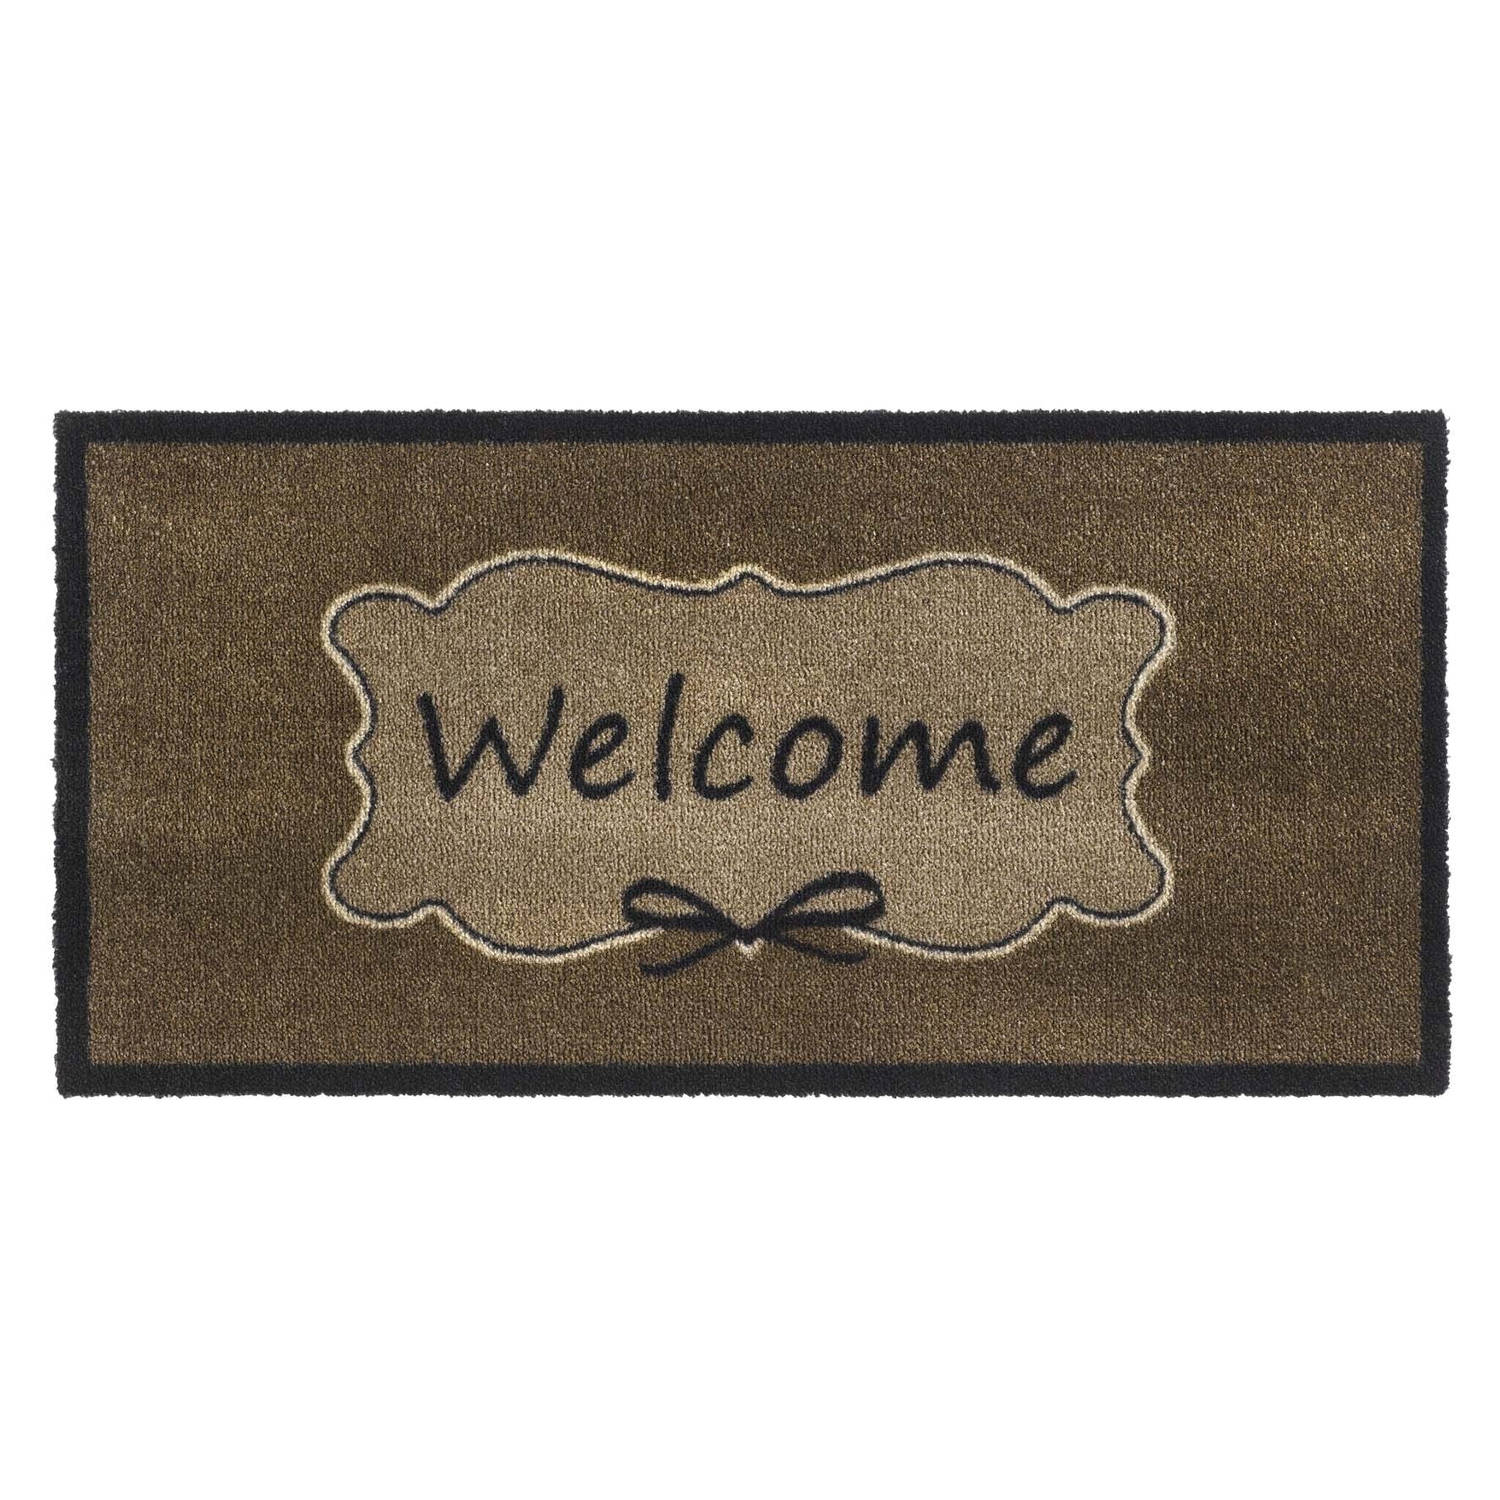 MD Entree - Schoonloopmat - Vision - Welcome - 40 x 80 cm